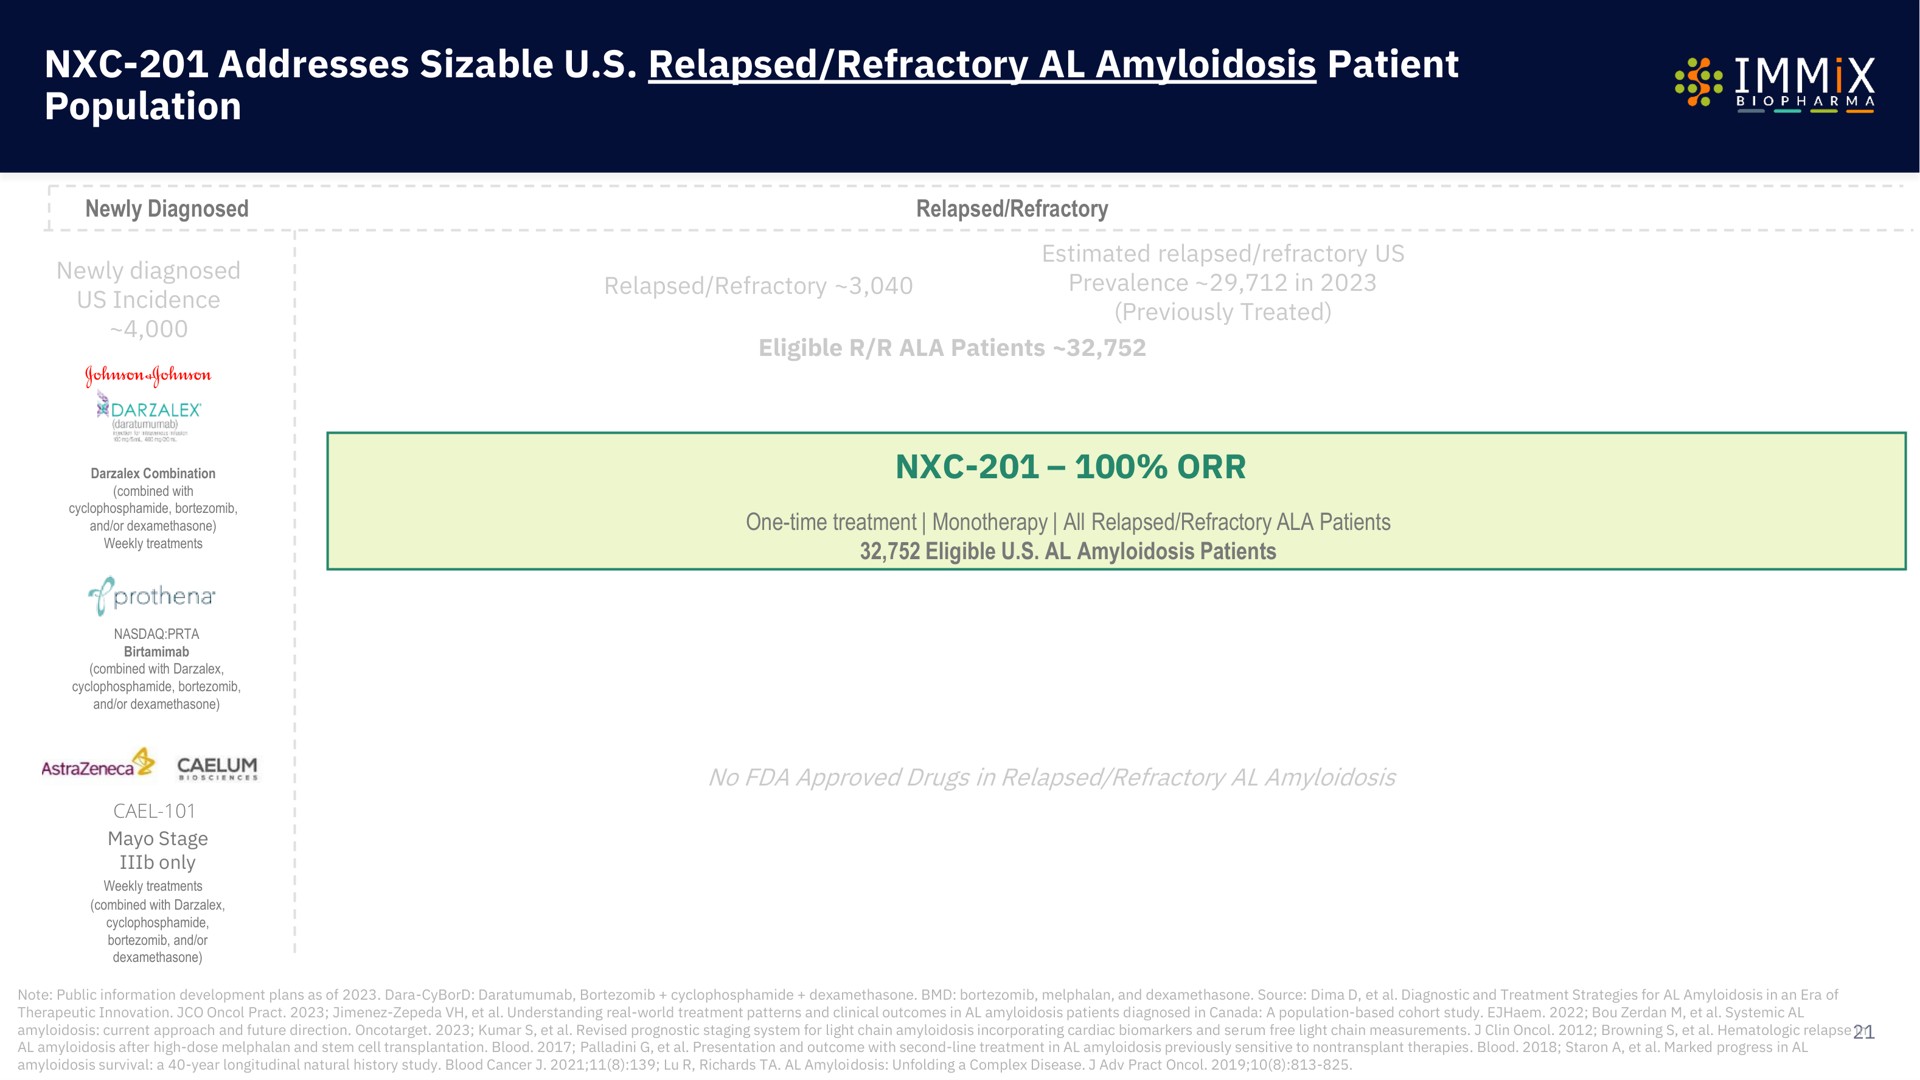 addresses sizable relapsed refractory amyloidosis patient population | Immix Biopharma